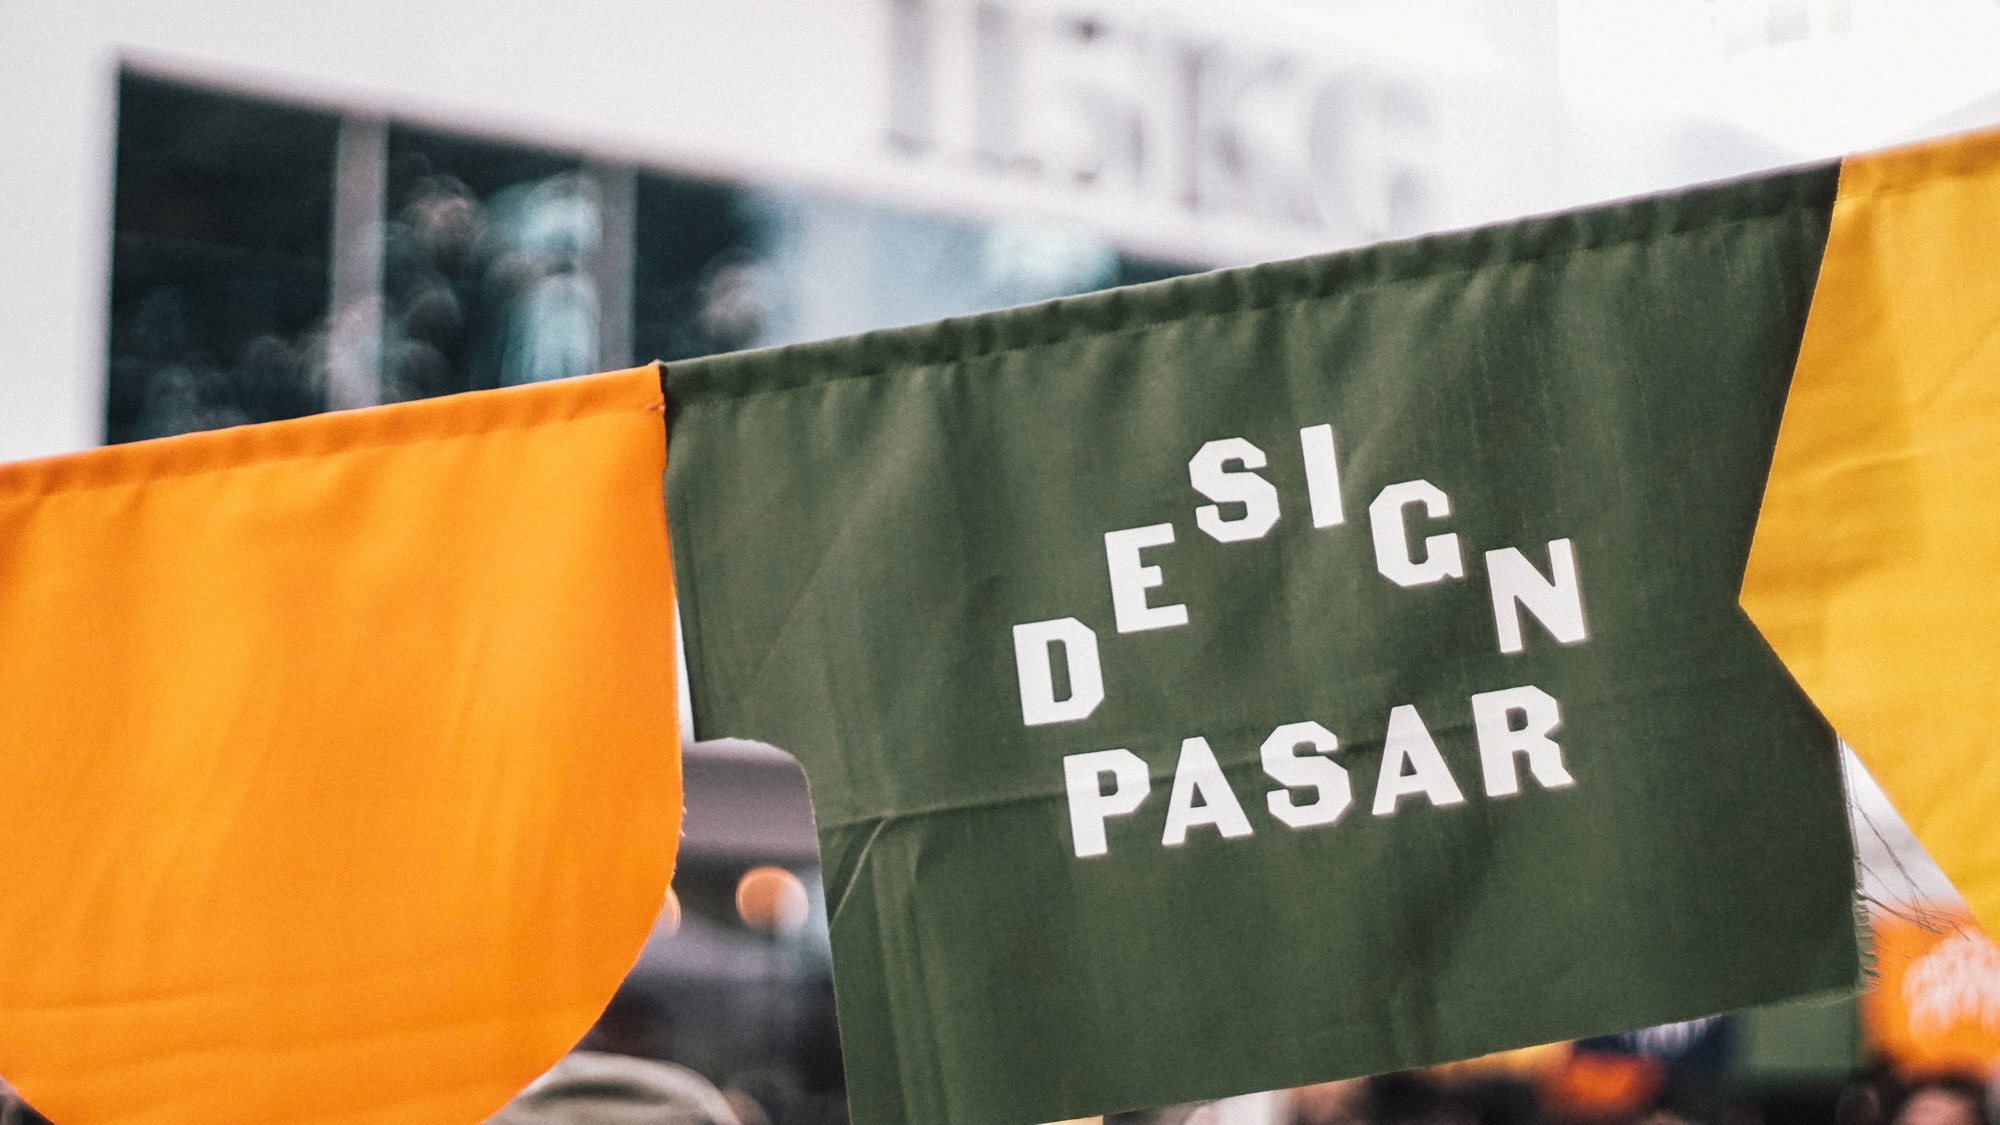 New Logo and Identity for Design Pasar by Foreign Policy